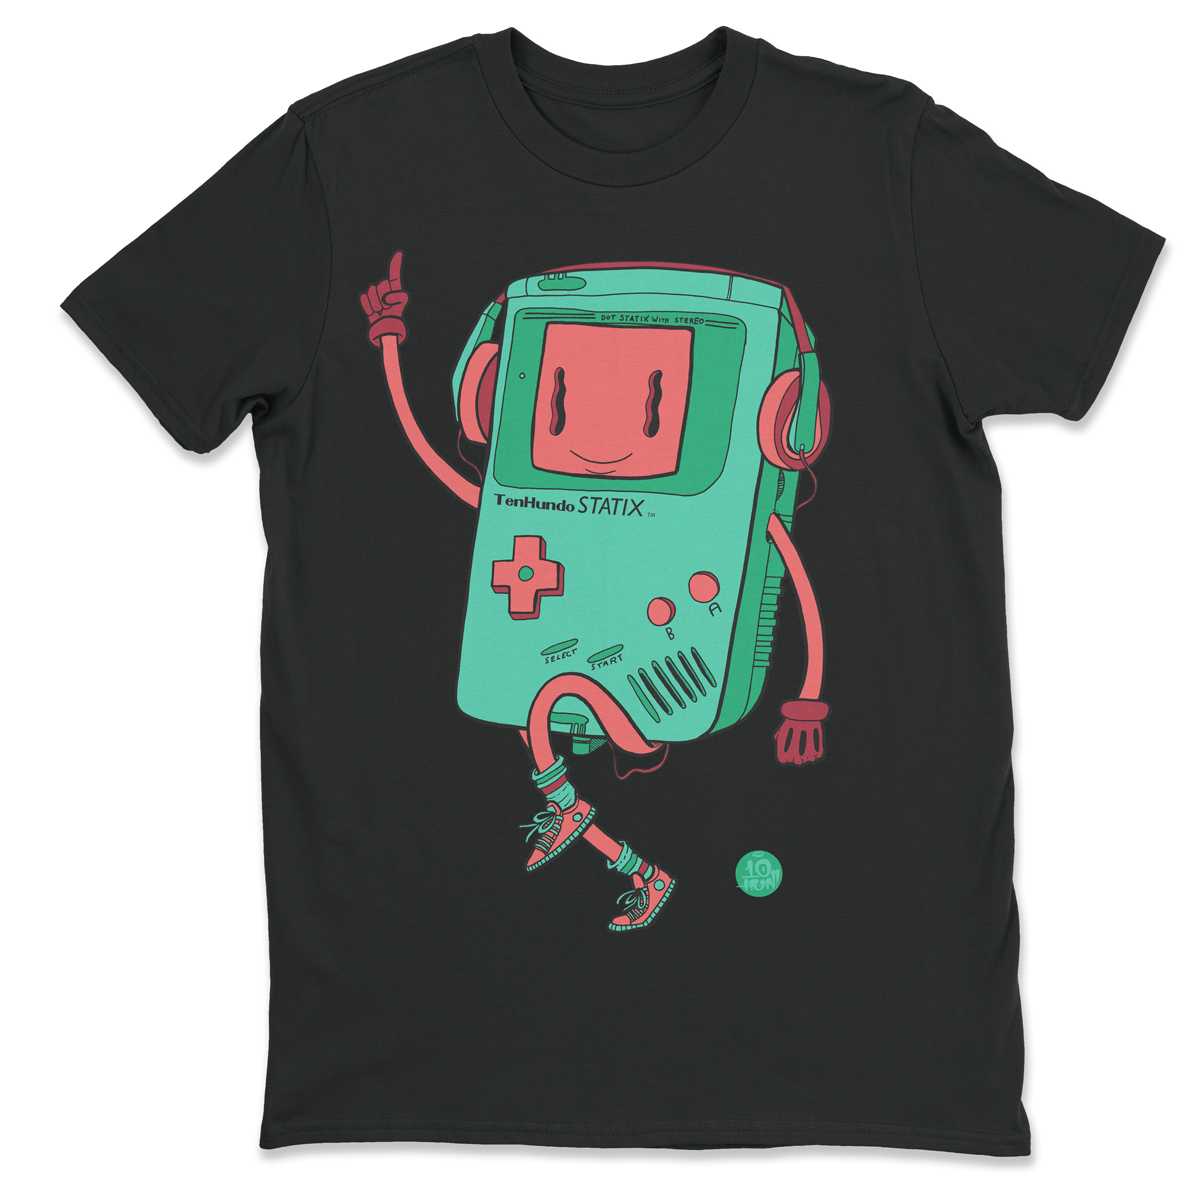 black shirt with a gameboy avatar character mid jump